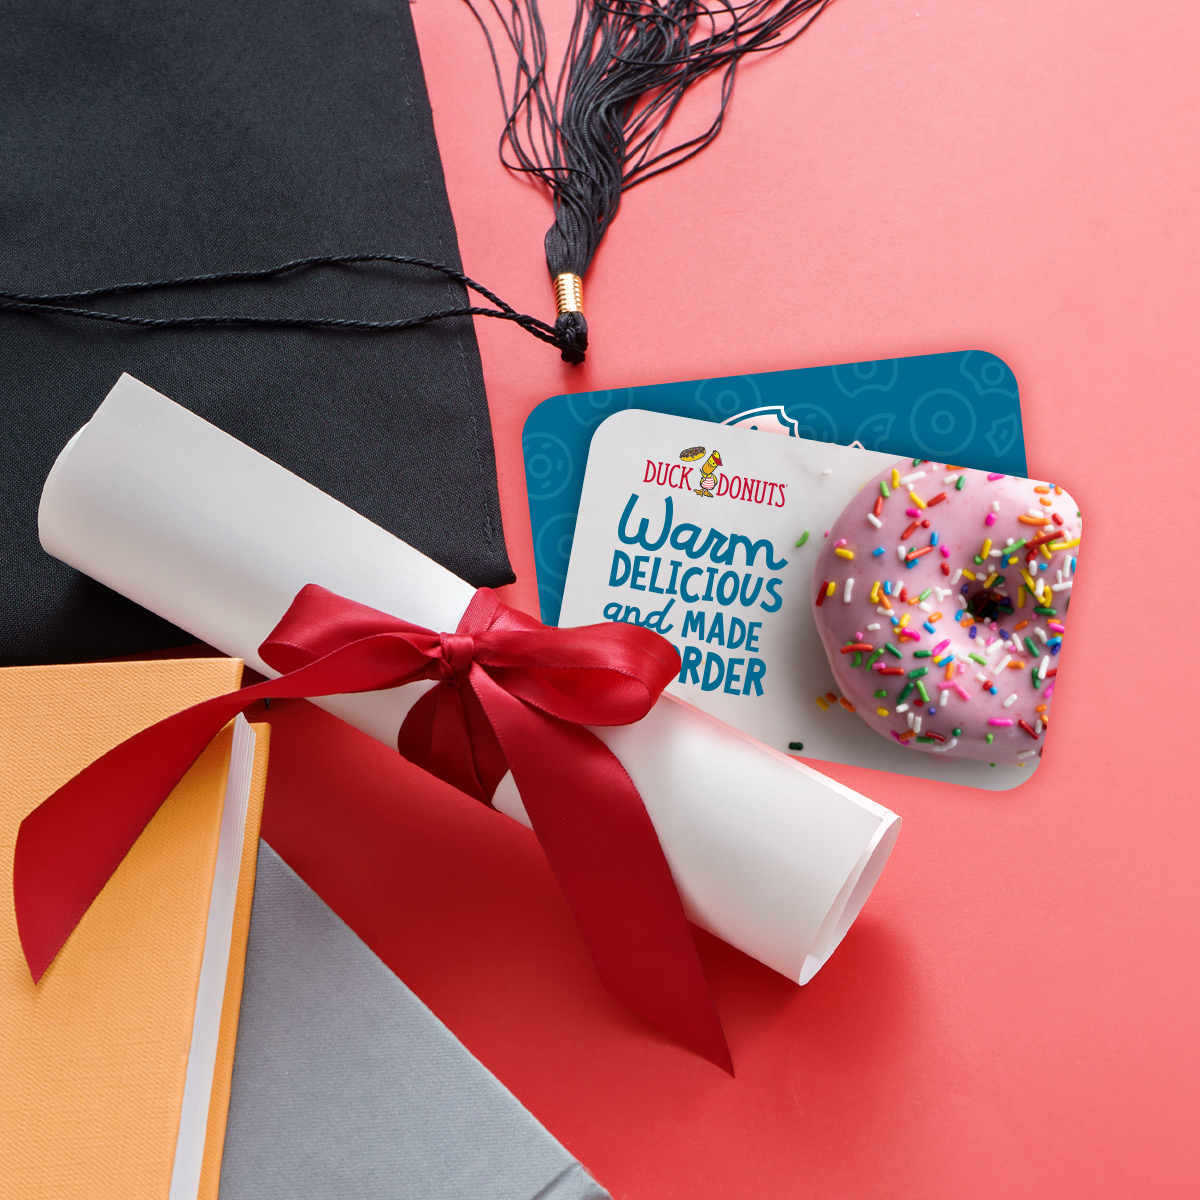 Give your graduate an A+ gift! 🎓🎁 Duck Donuts gift cards are available in the shop, online, or in the app.

#congratulations #graduate #graduation #boxofdonuts #myduckdonuts #nomnom #foodies #eeeeeats #donuts #duckdonuts #madetoorder #donut #favorites